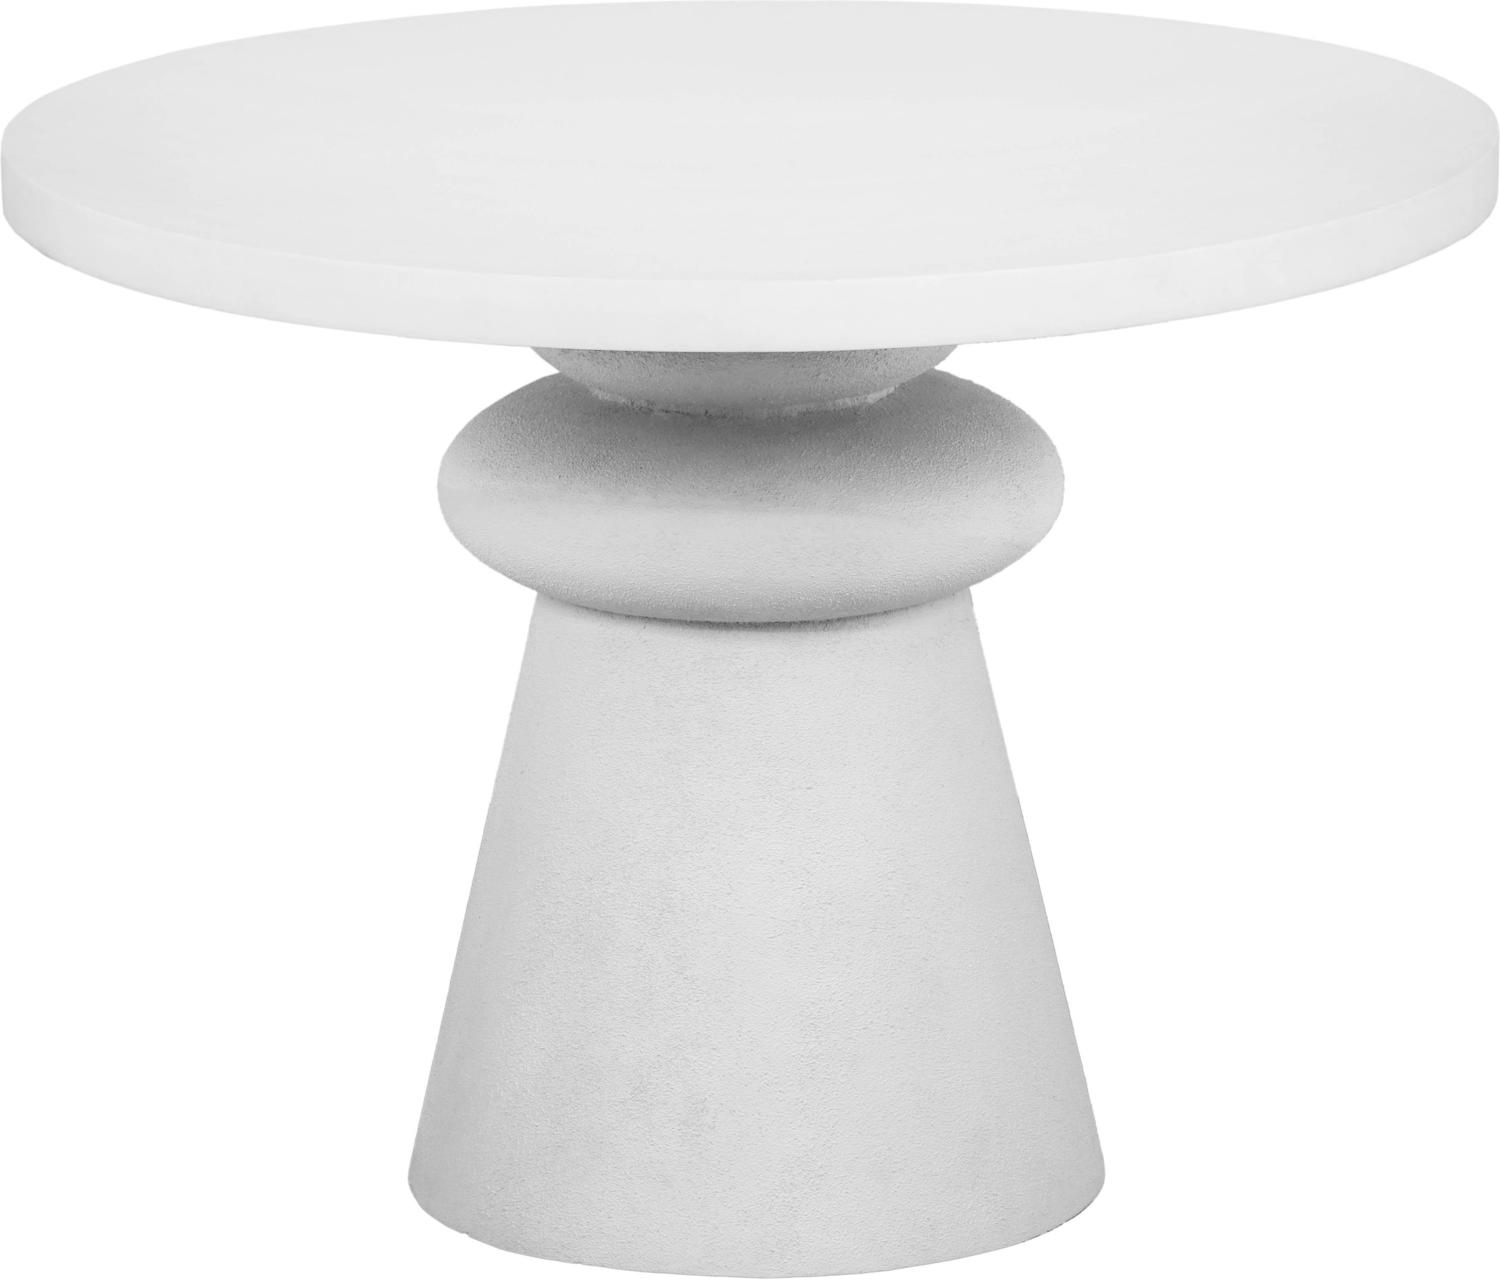 glass table design for living room Tov Furniture Dining Tables Accent Tables White